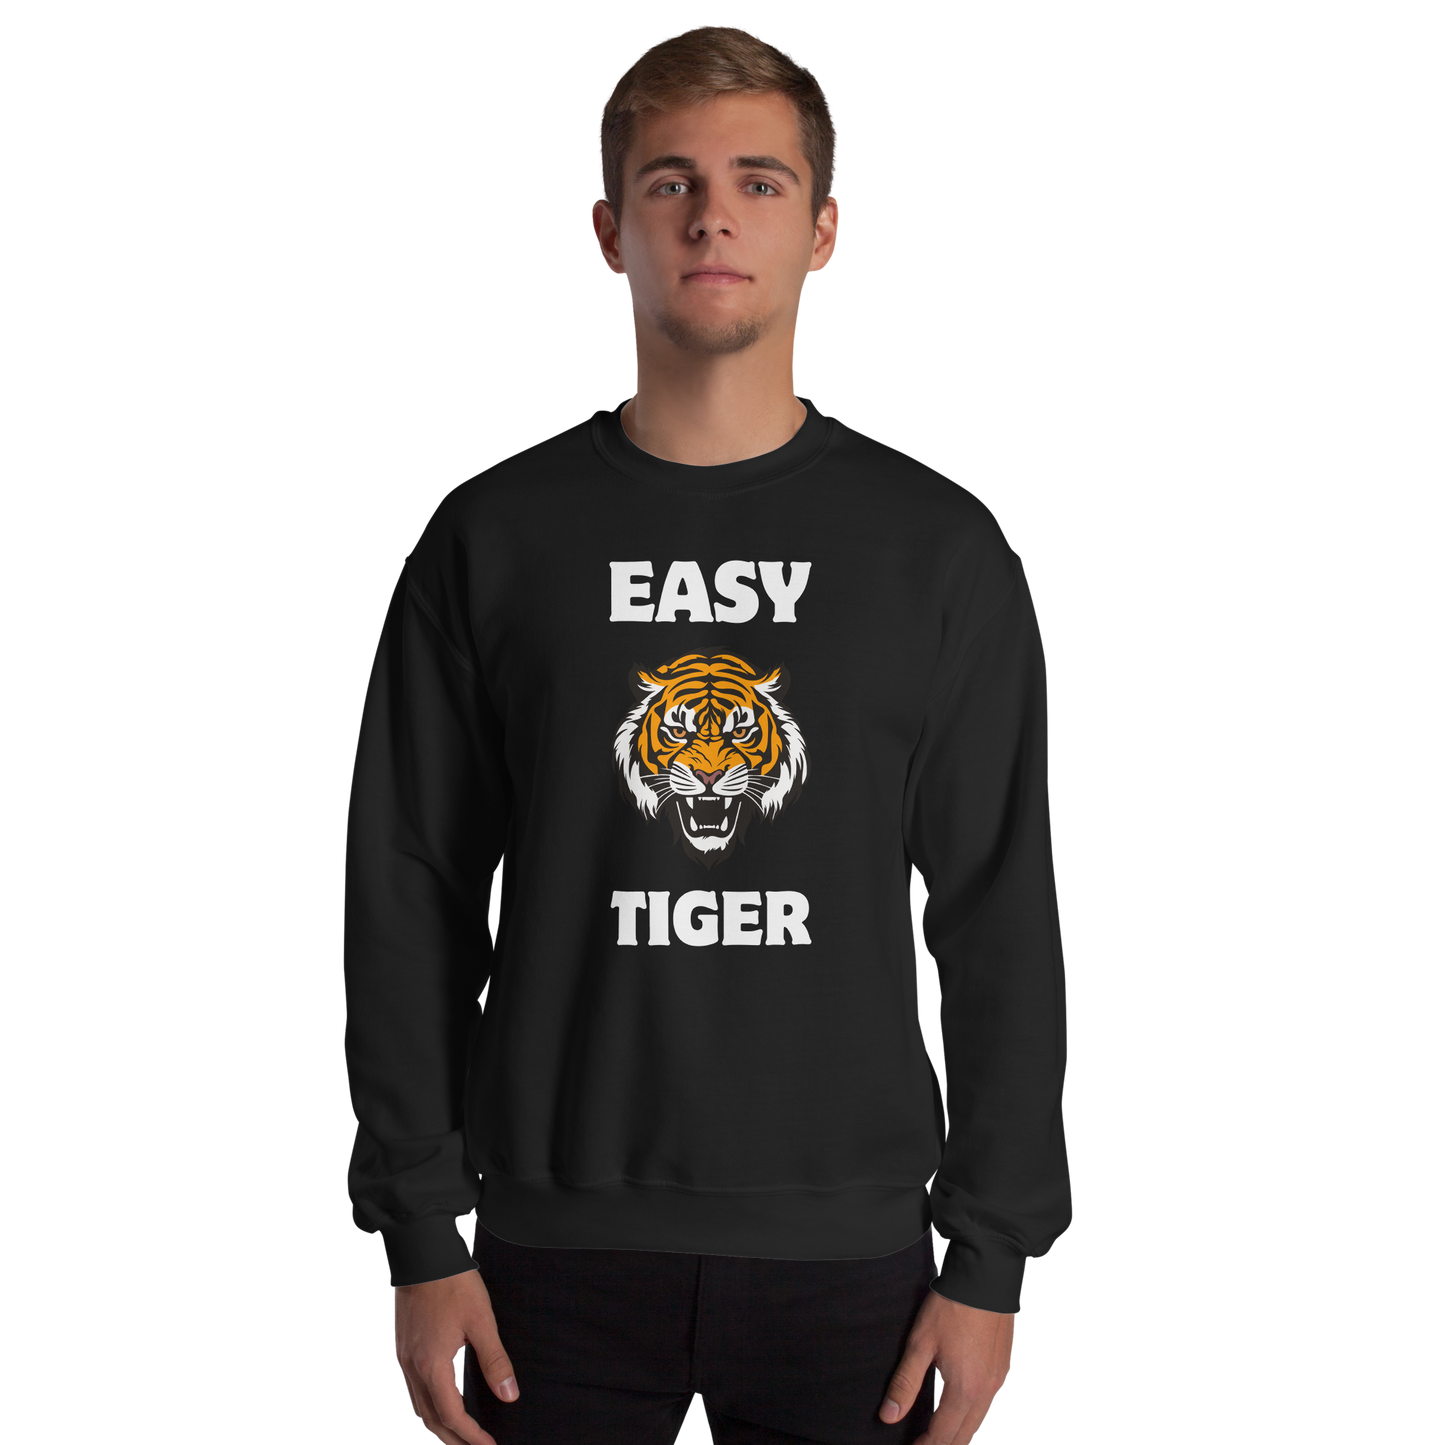 Man wearing a Black Tiger Sweatshirt featuring a Easy Tiger graphic on the chest - Funny Graphic Tiger Sweatshirts - Boozy Fox